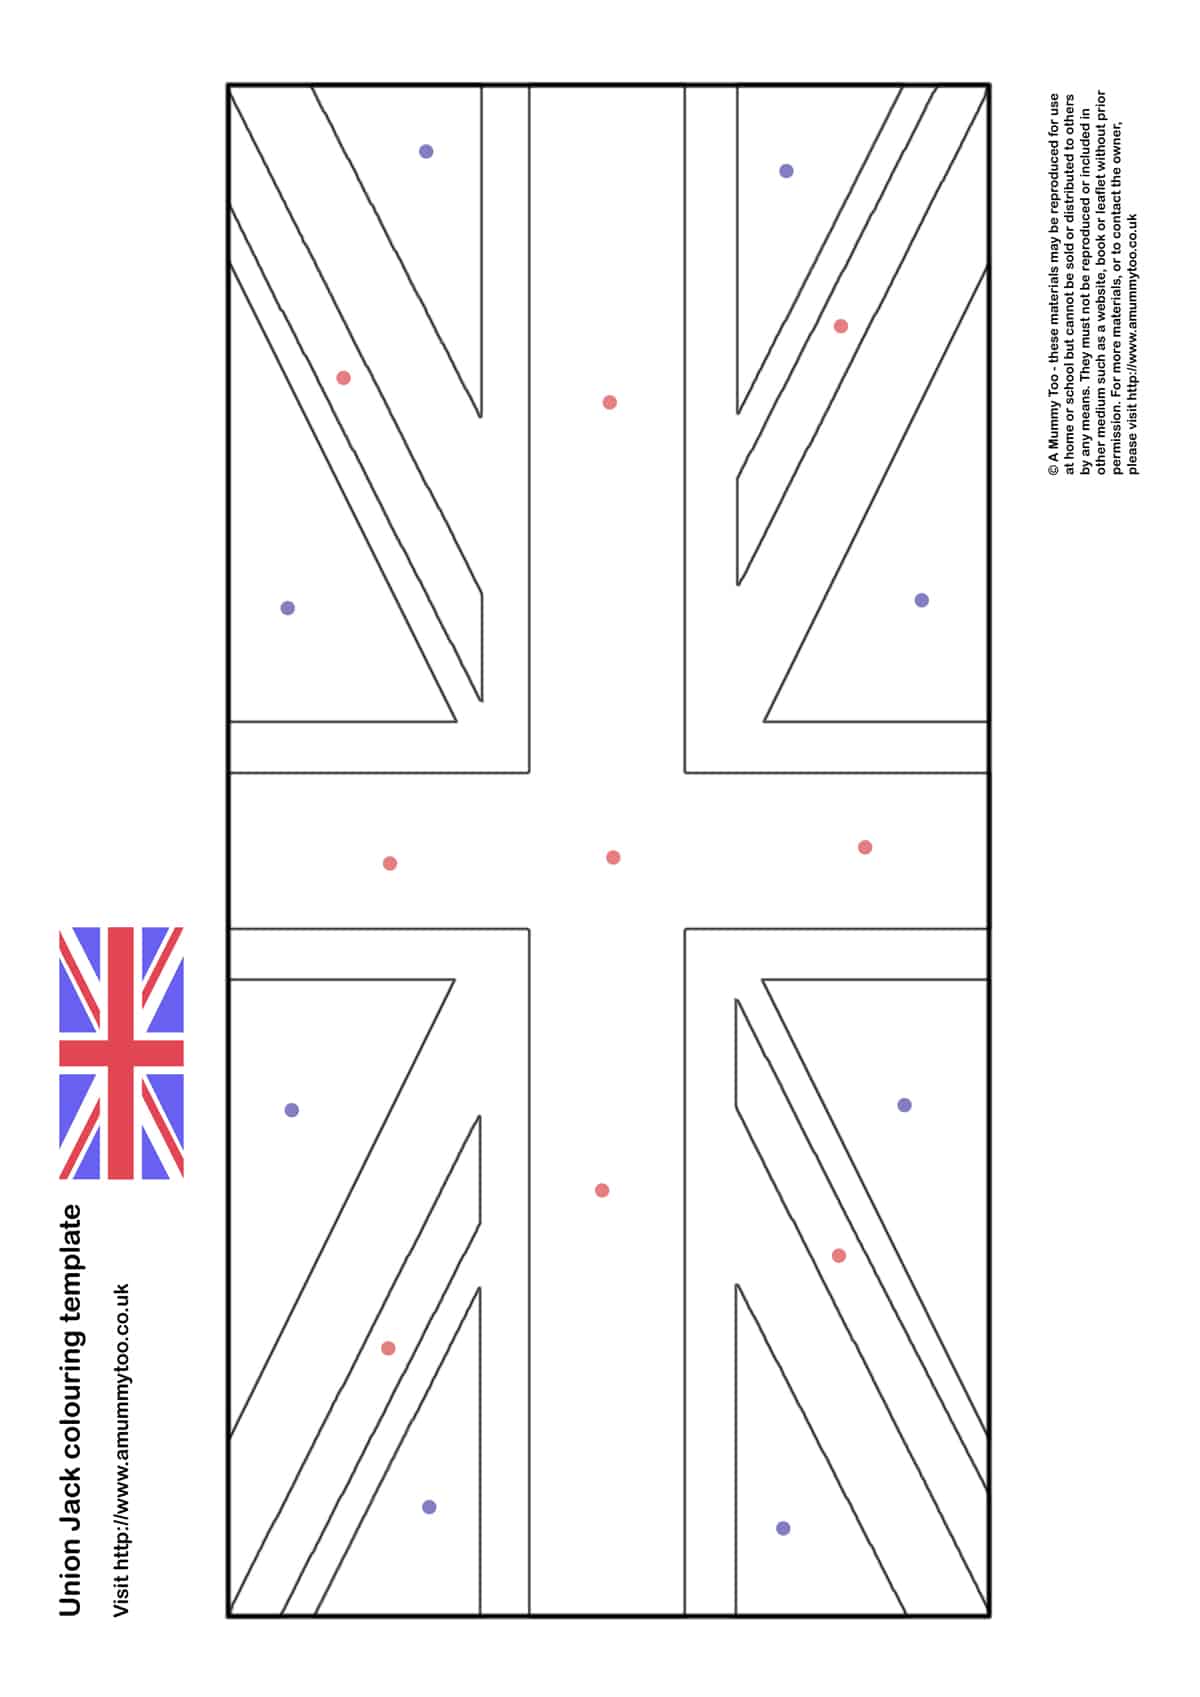 Union jack print out with dots to show where the colours are meant to go.